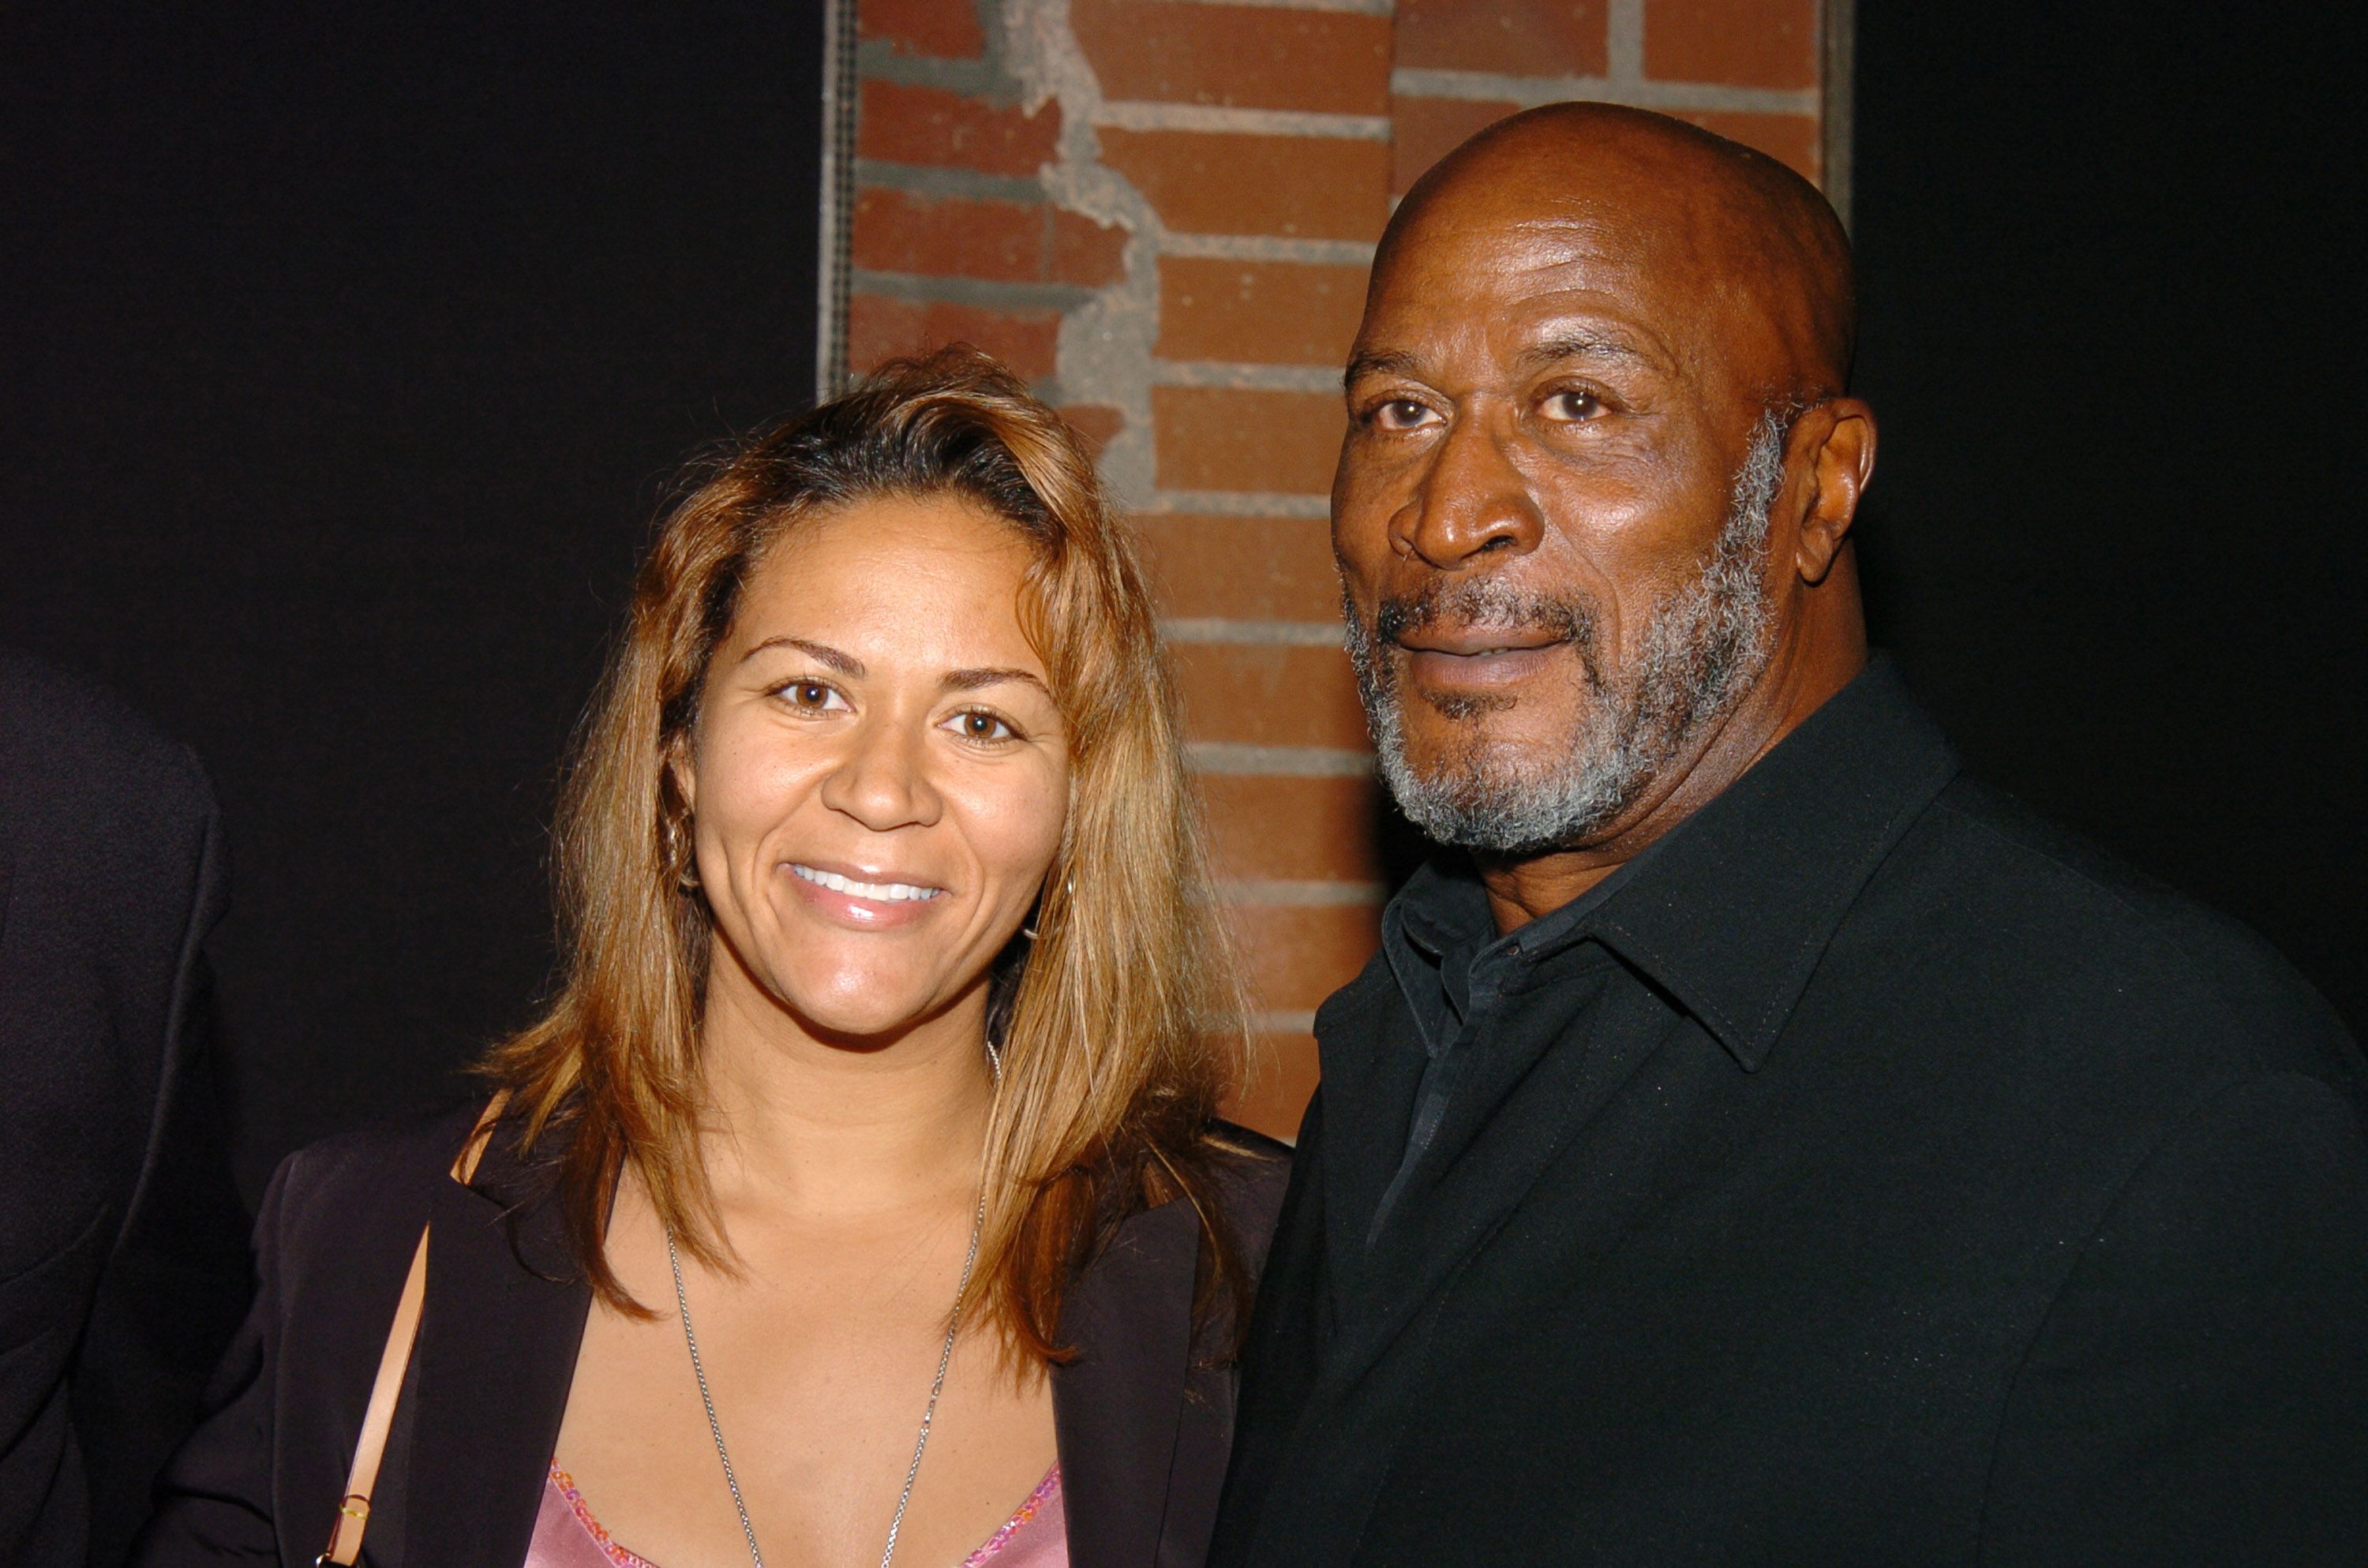 John Amos and daughter Shannon at the Cure Autism Now Celebrates Third Annual "Acts of Love" - After Party on November 08, 2004 in Los Angeles, California | Photo: Getty Images